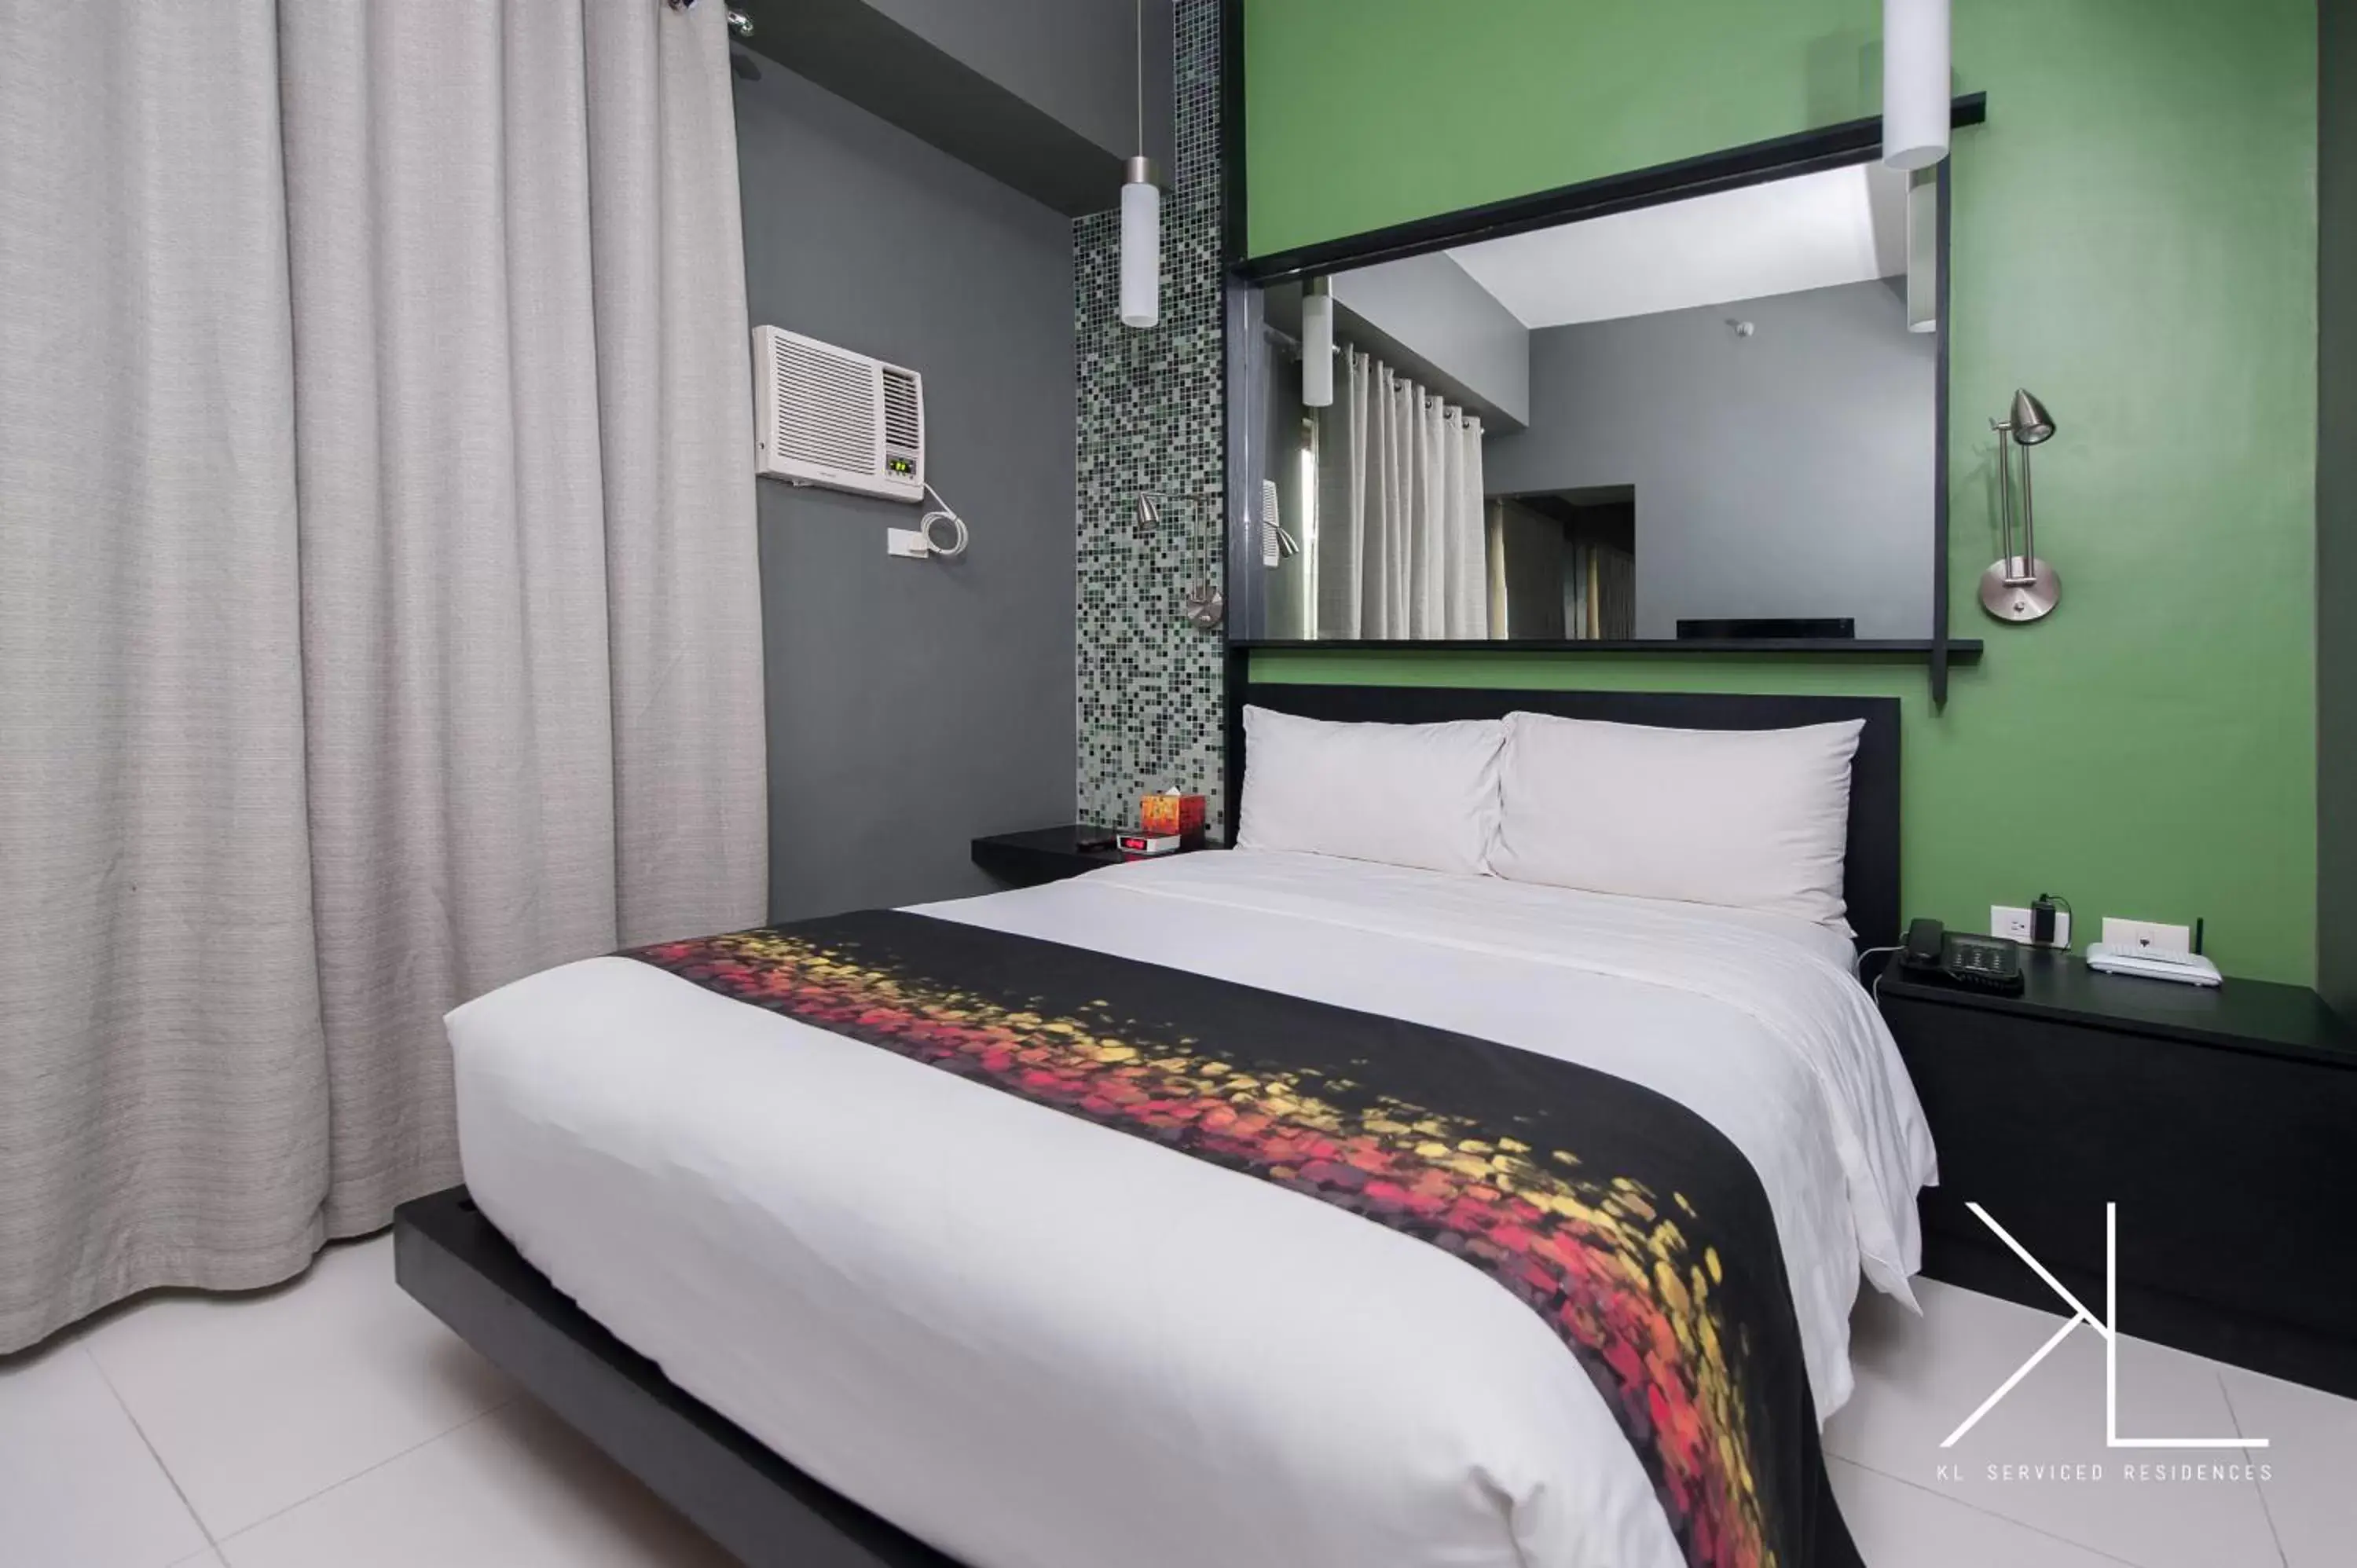 Bed in KL Serviced Residences Managed by HII